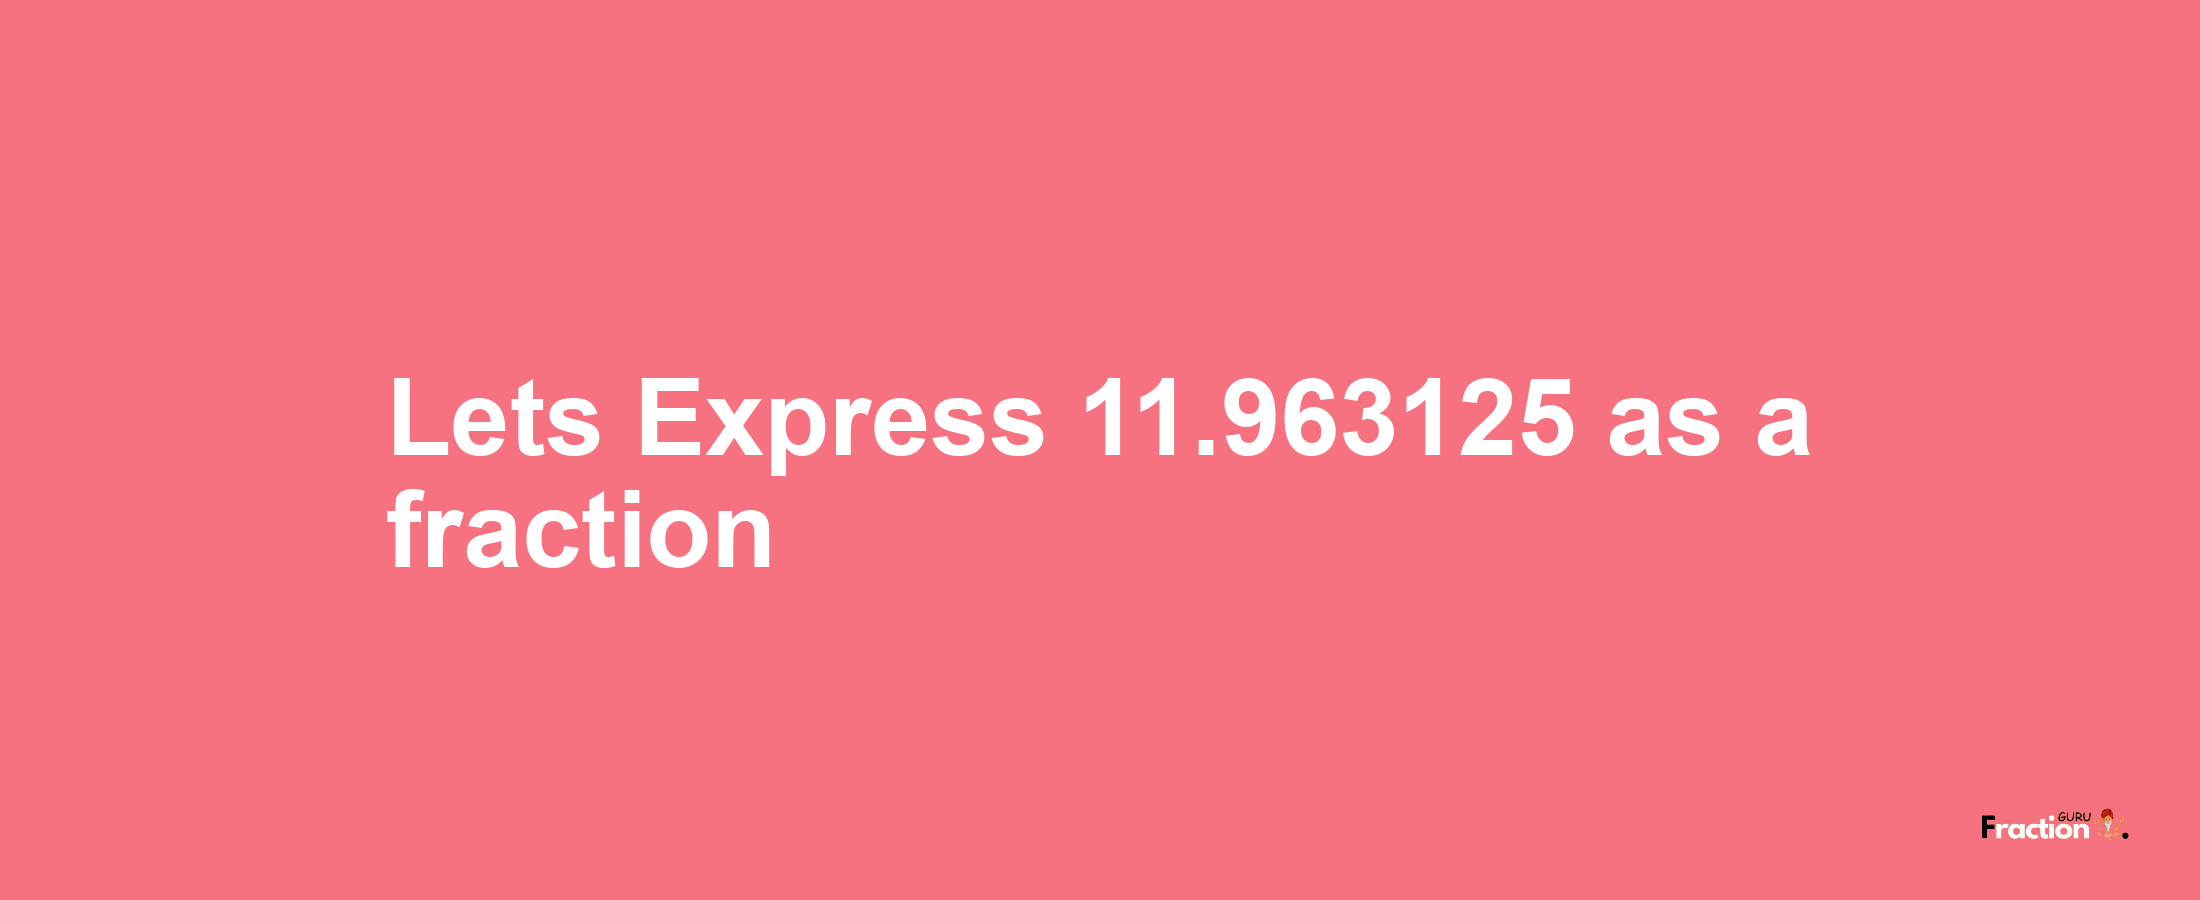 Lets Express 11.963125 as afraction